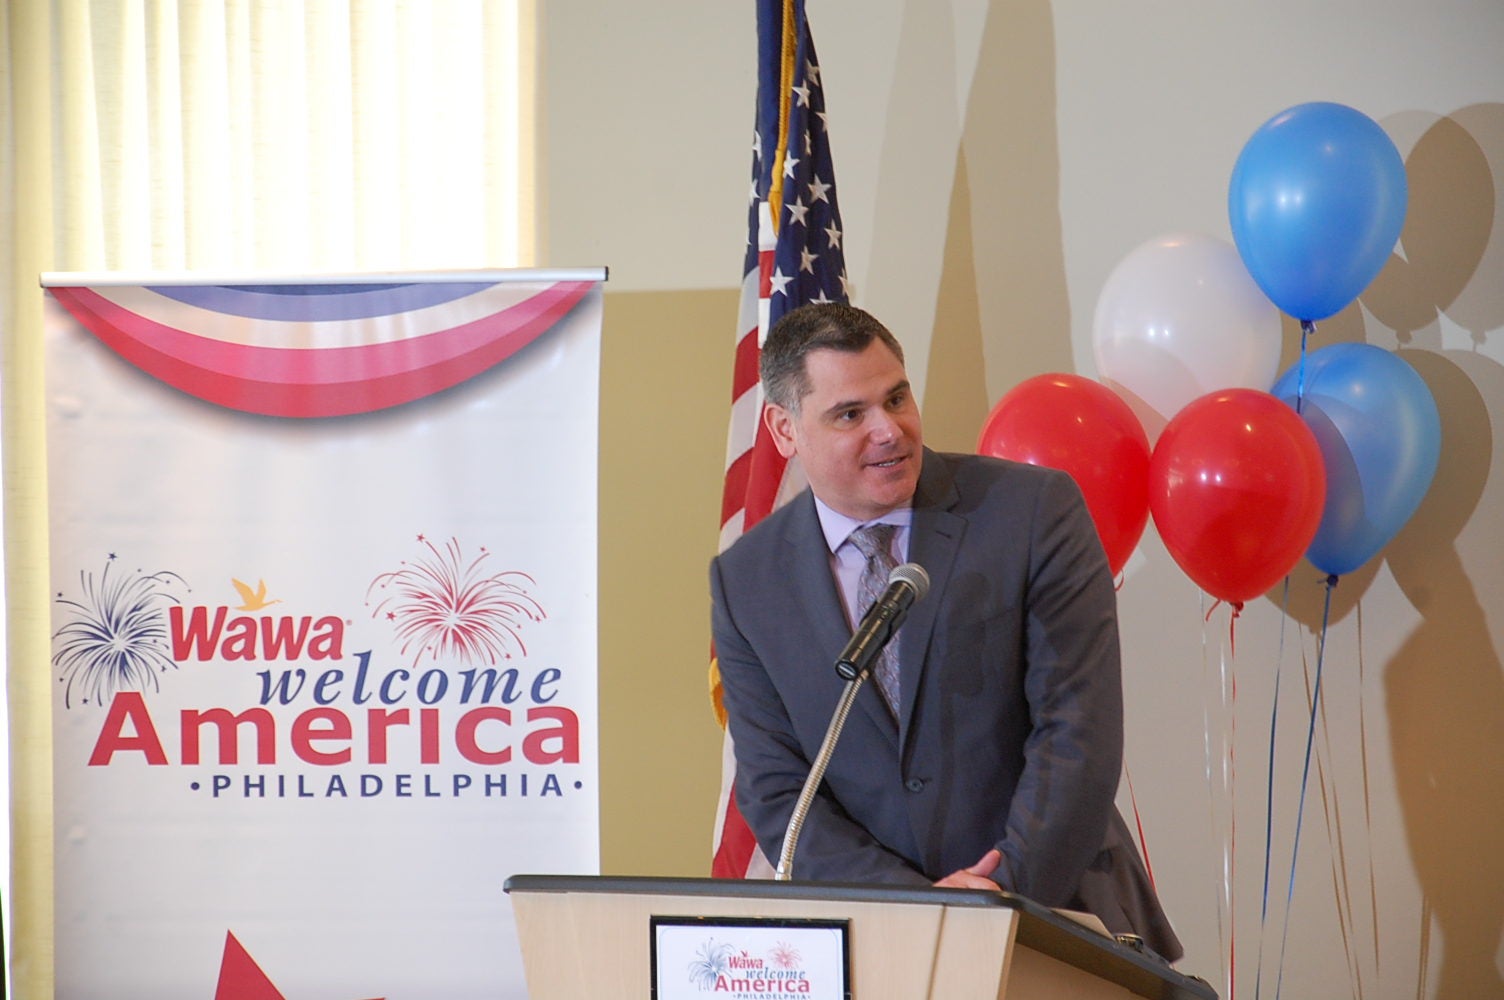 Welcome America's Jeff Guaracino announces the acts for July 4th concert (Tom MacDonald/WHYY)